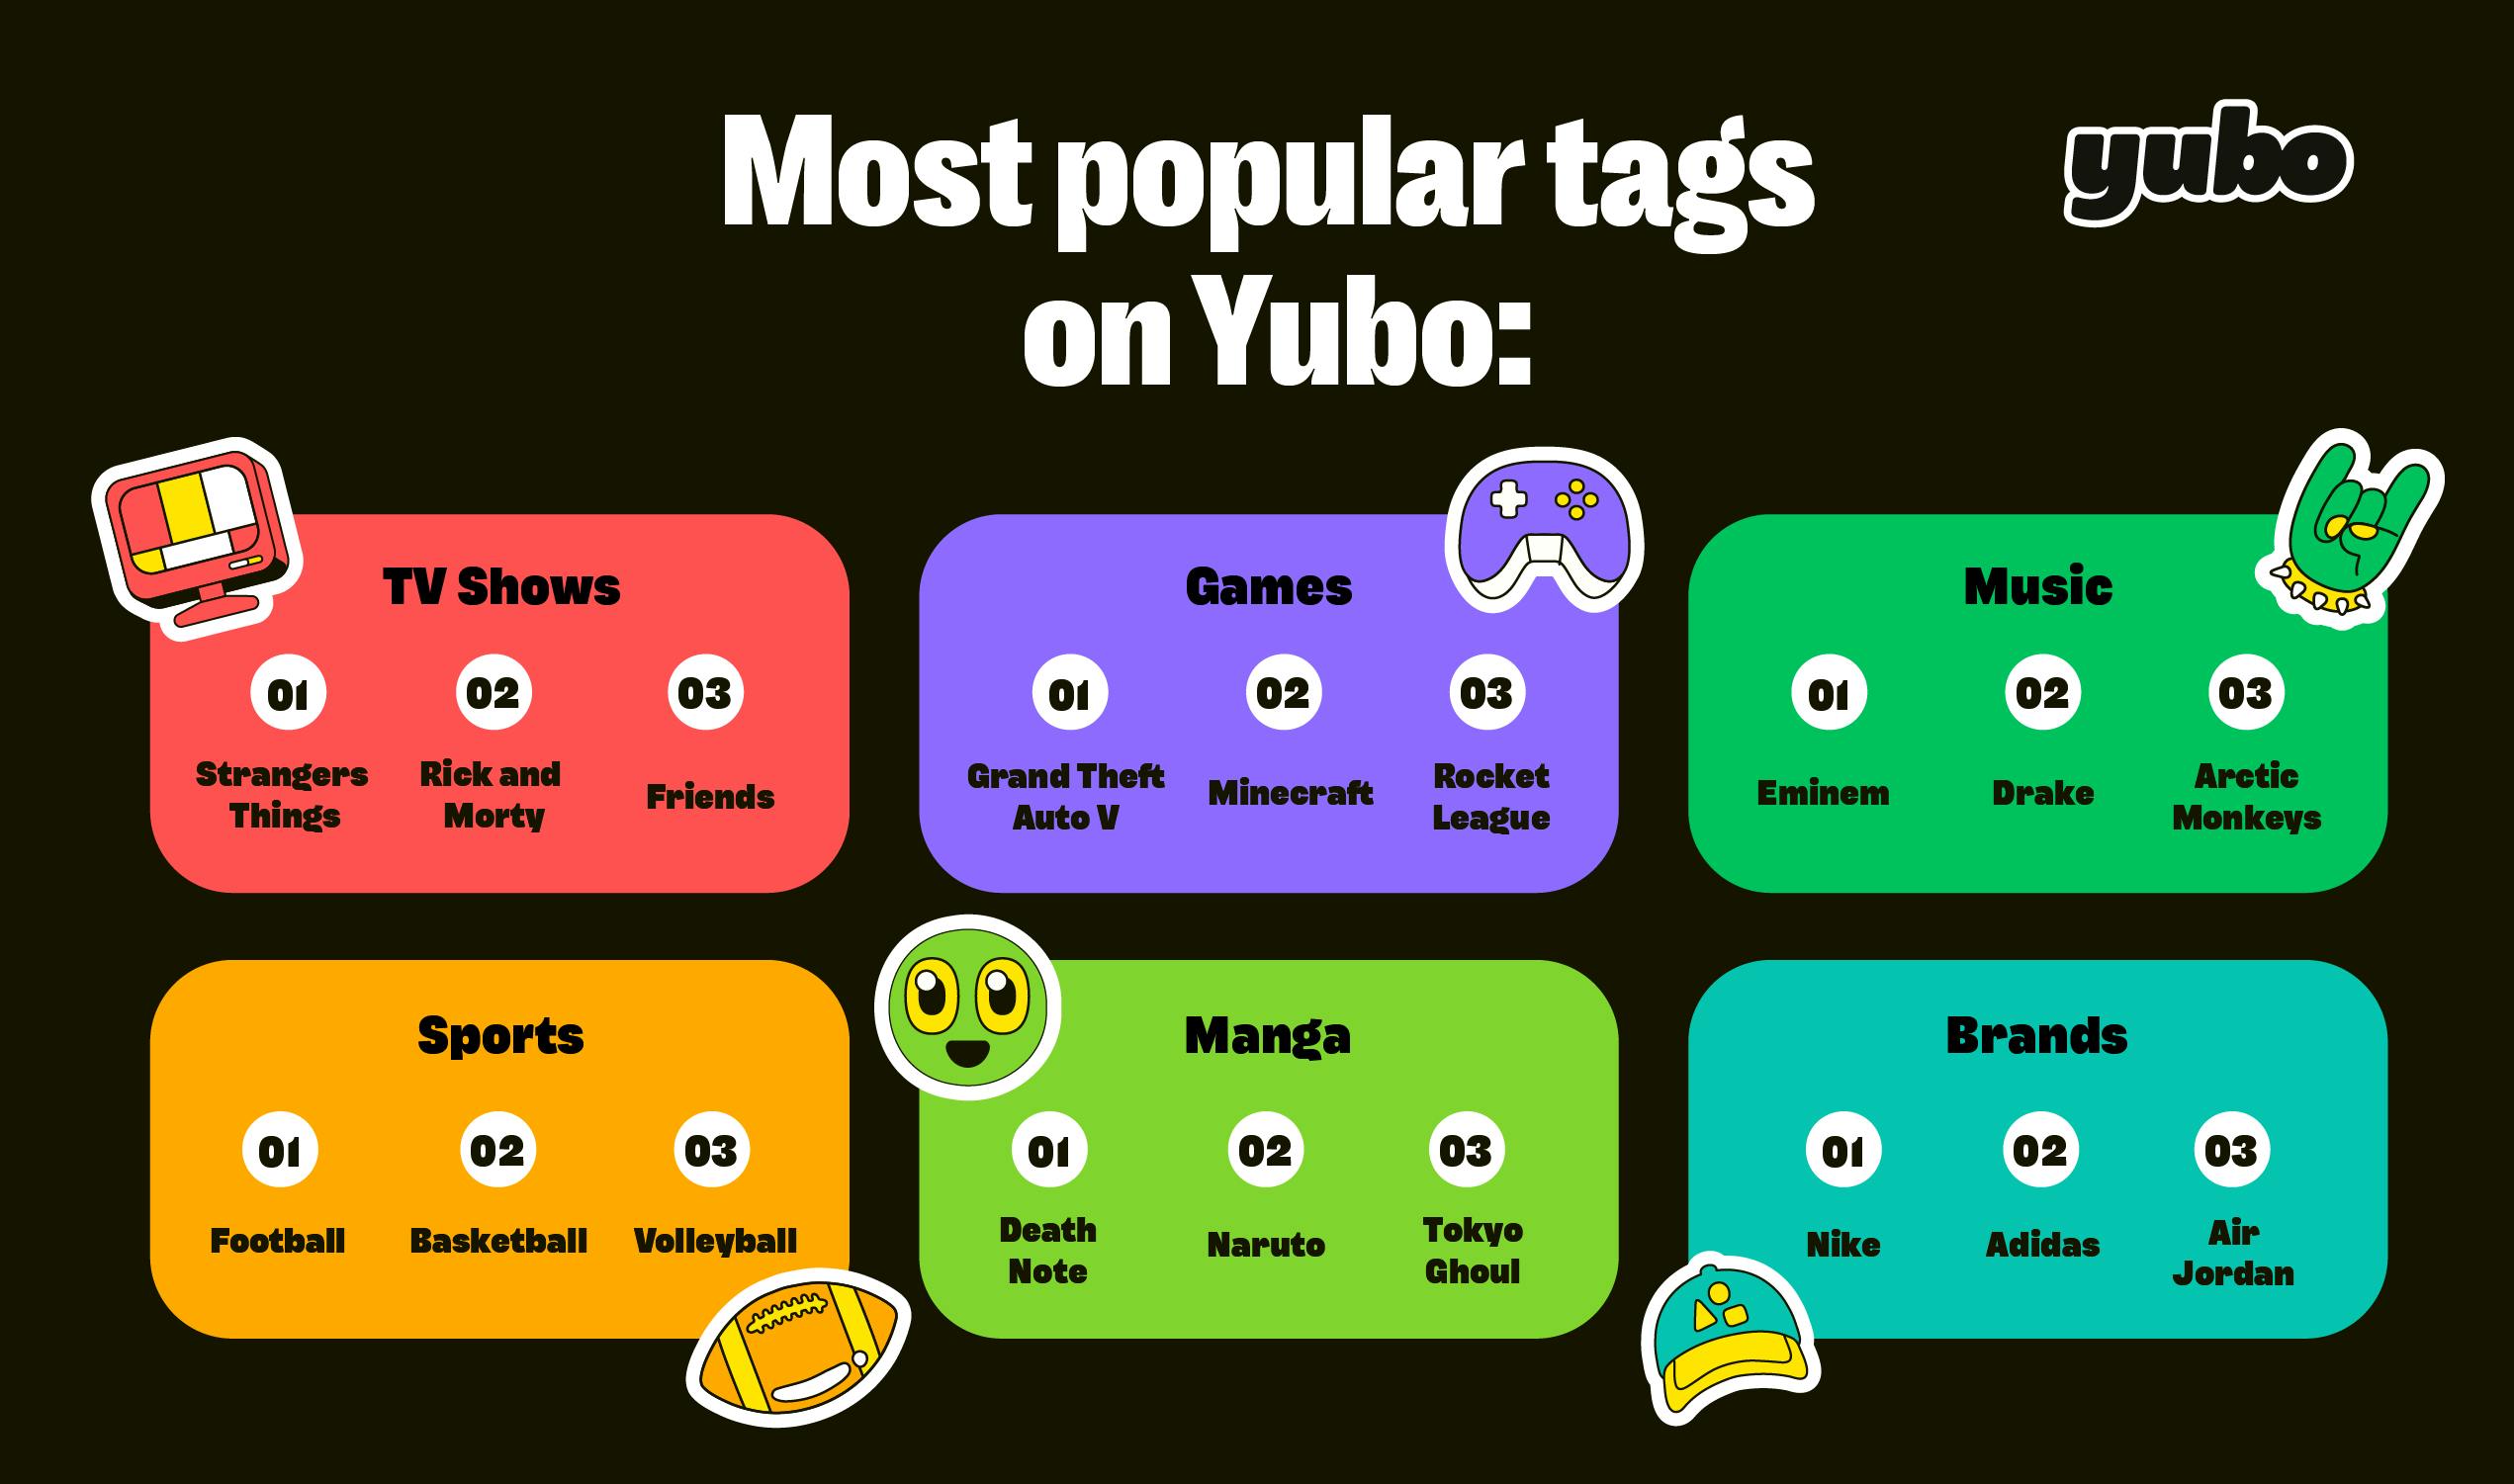 Most popular tags on Yubo. 6 categories are present: TV Shows, Games, Music, Sports, Manga and Brand